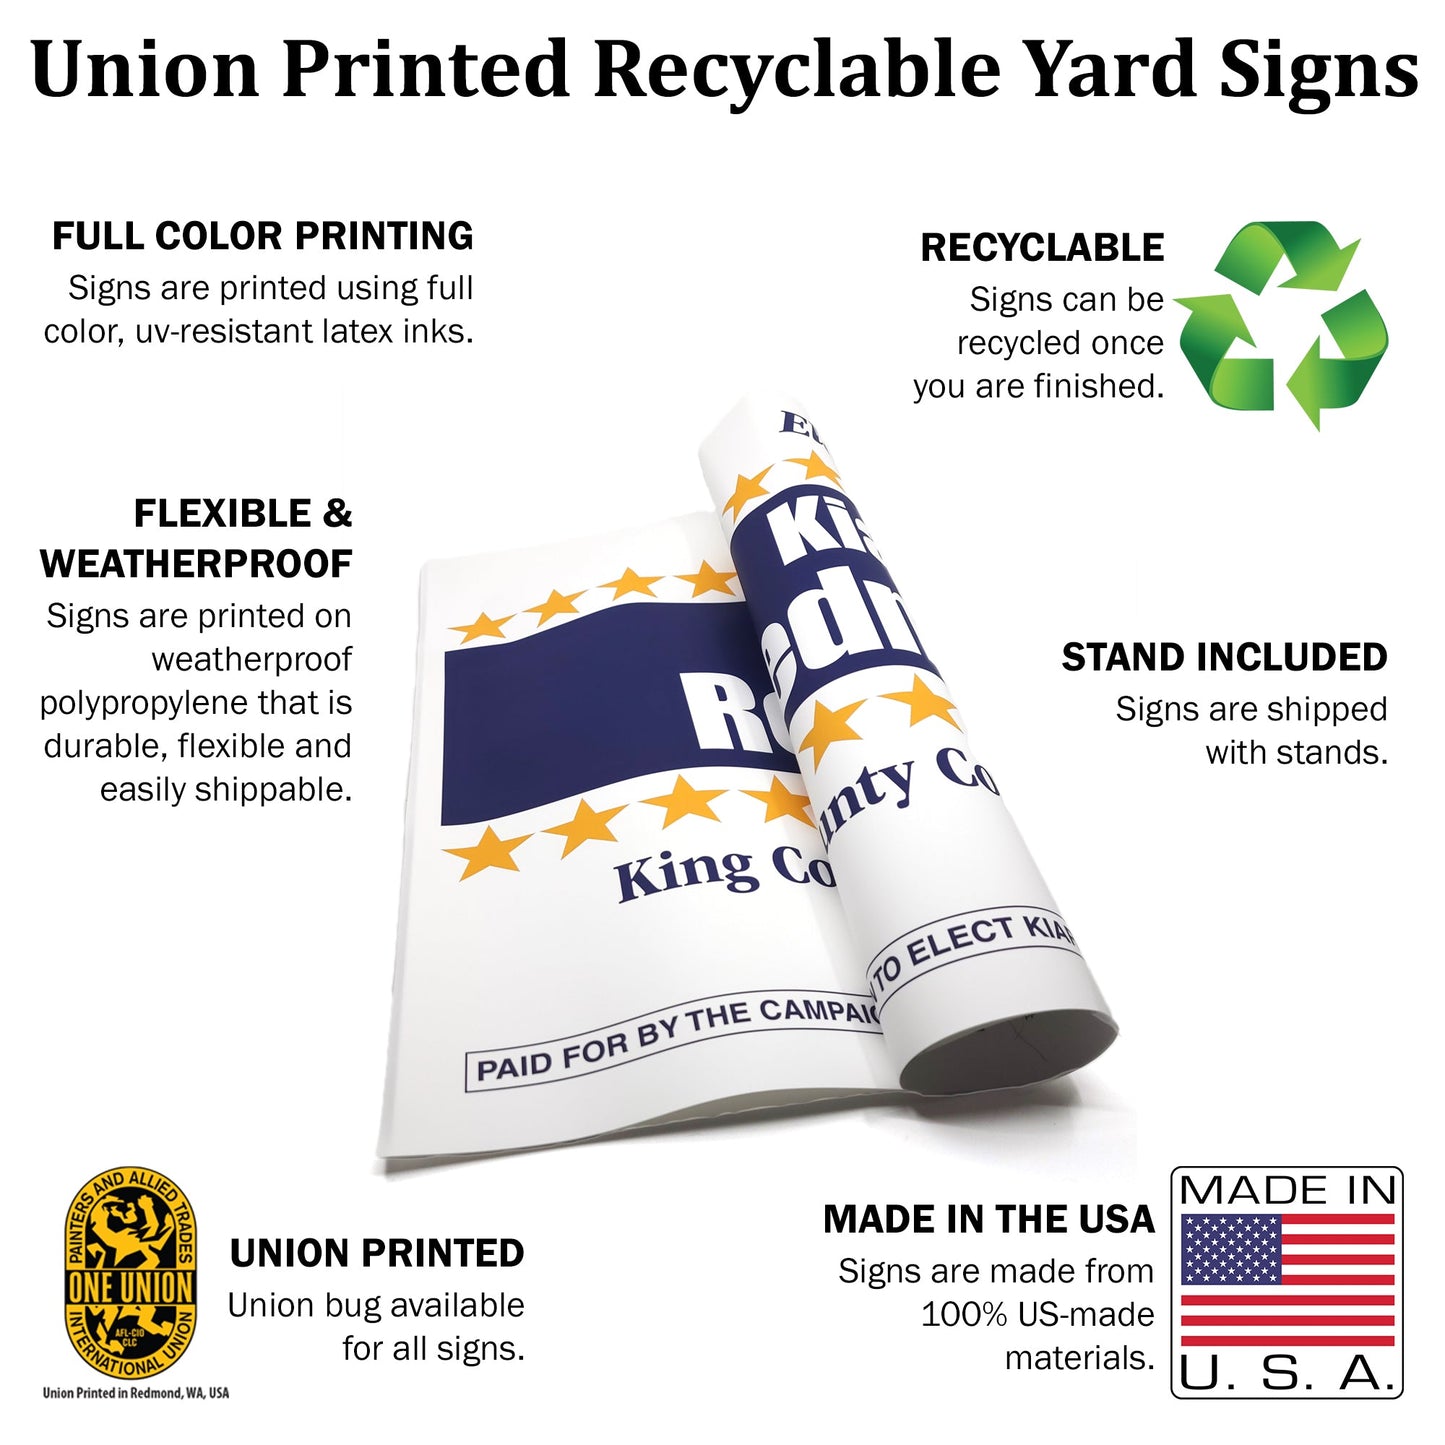 MerchBlue Union-Printed Yard sign - 24x18 - Stars Above design - Recyclable - Made in the USA